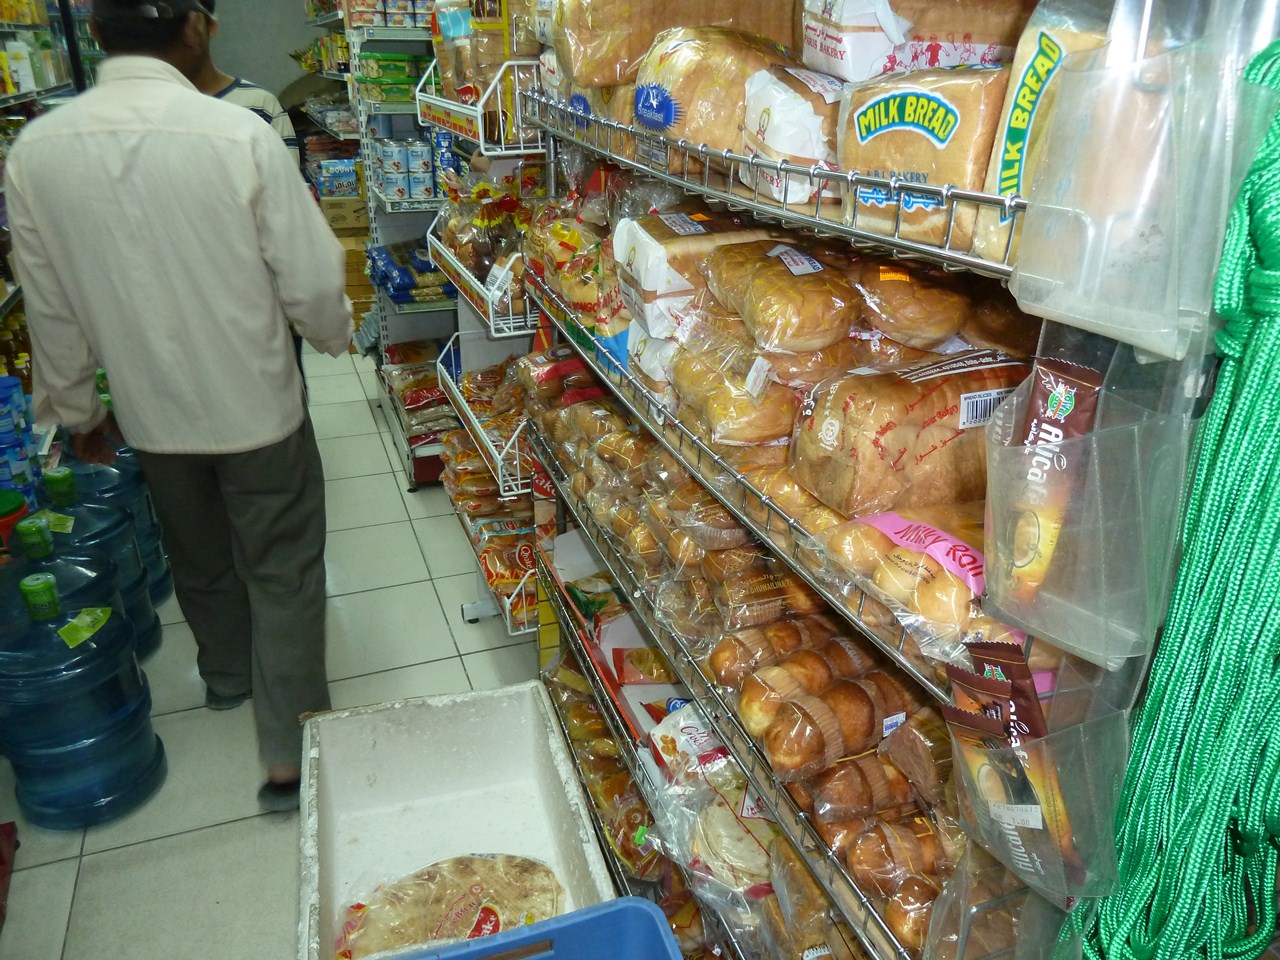 http://www.shintoko.jp/engblog/archives/images/2012/05/120527_alfahadfoodcenter663.jpg